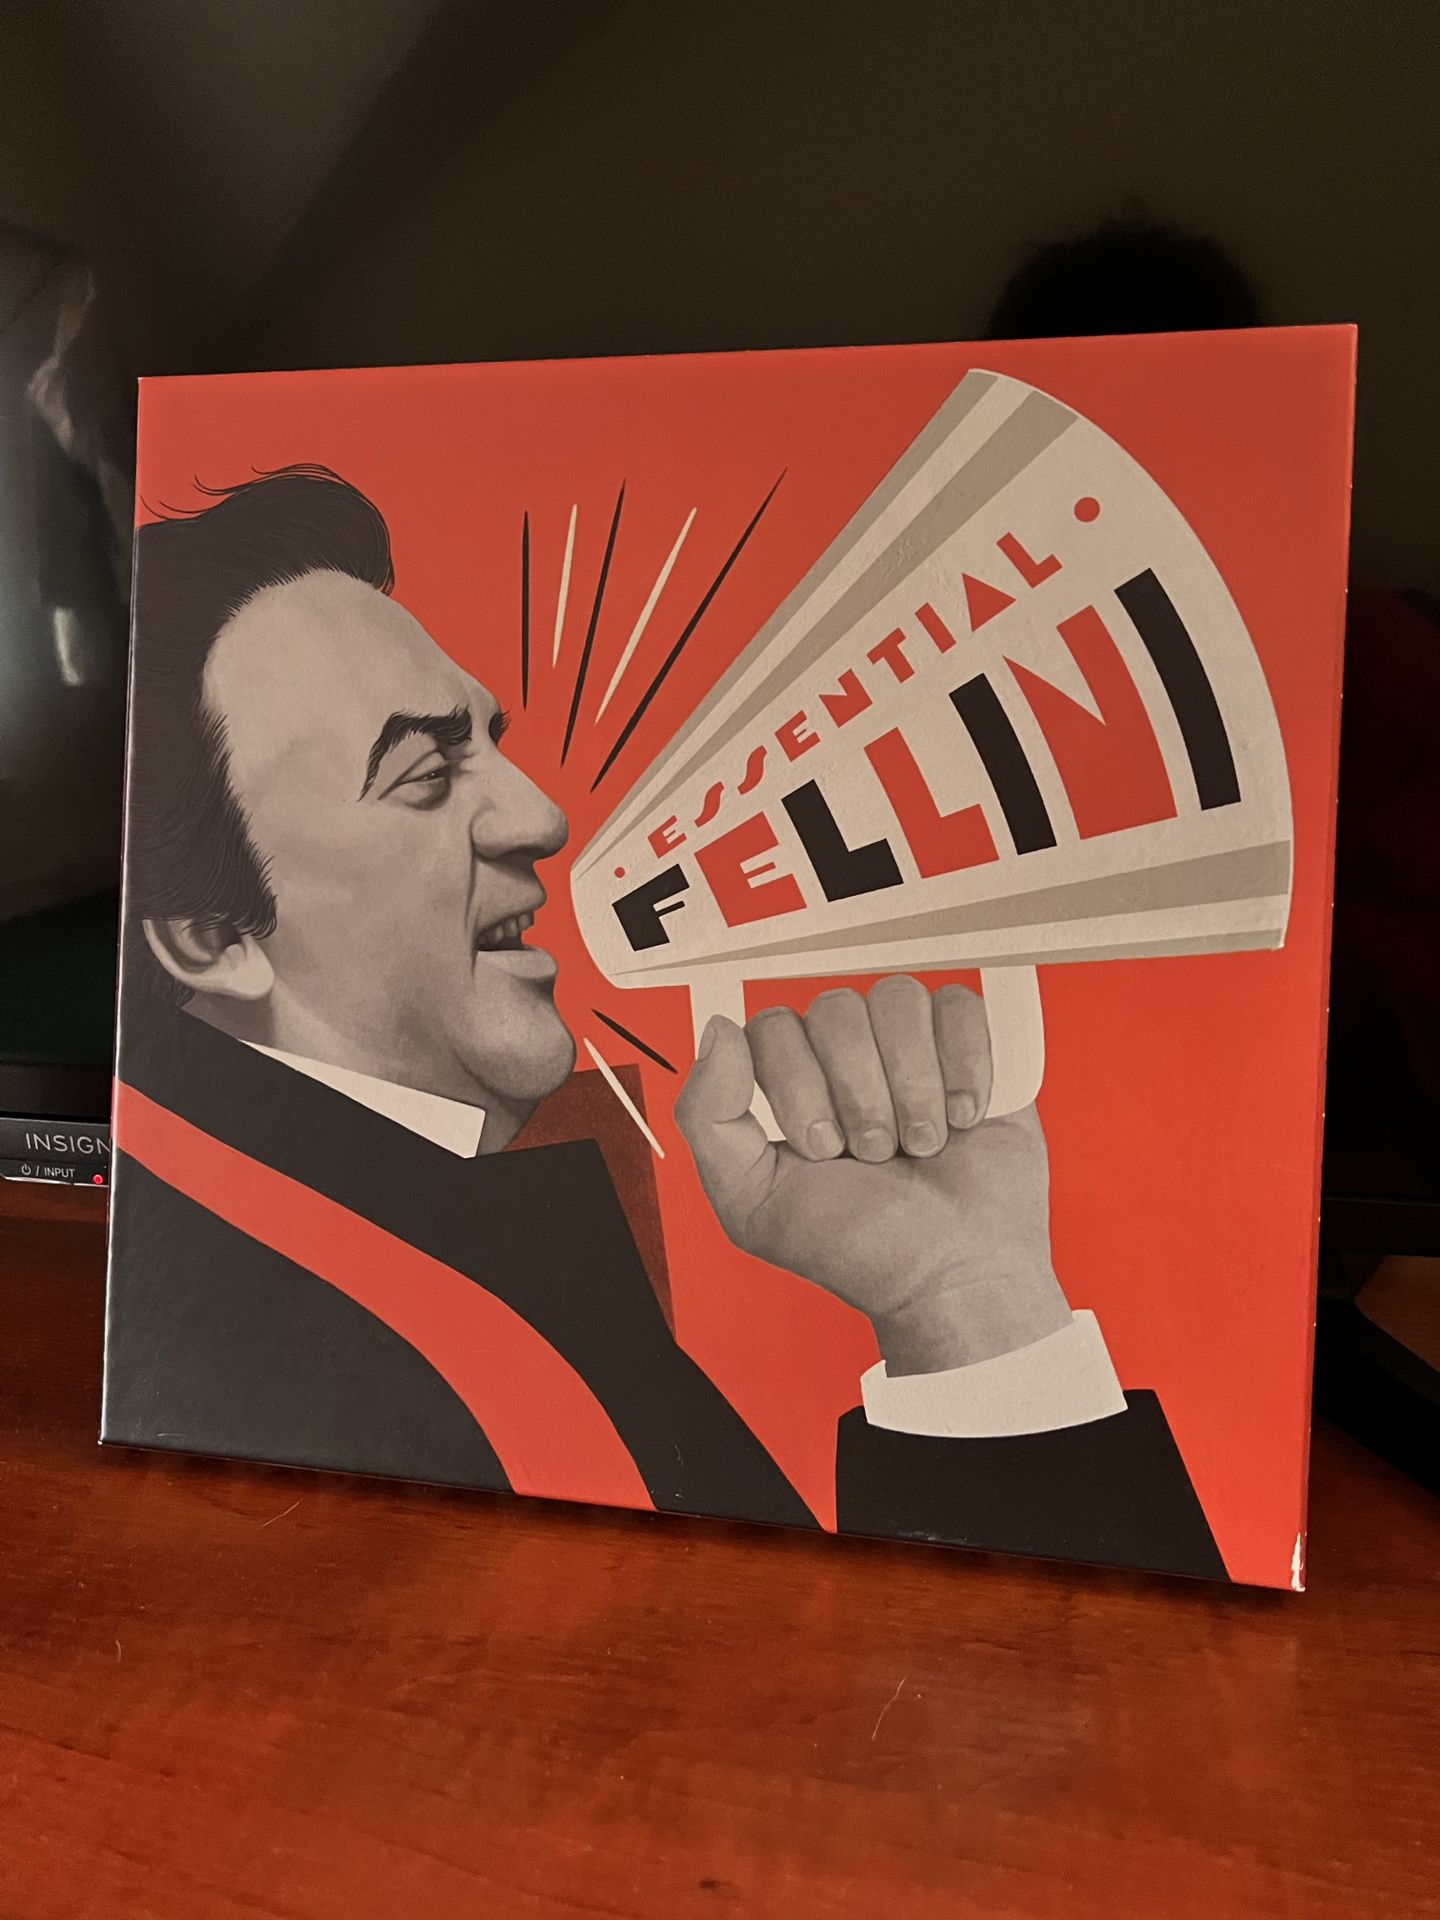 Essential Fellini (Criterion Collection) Blu-ray